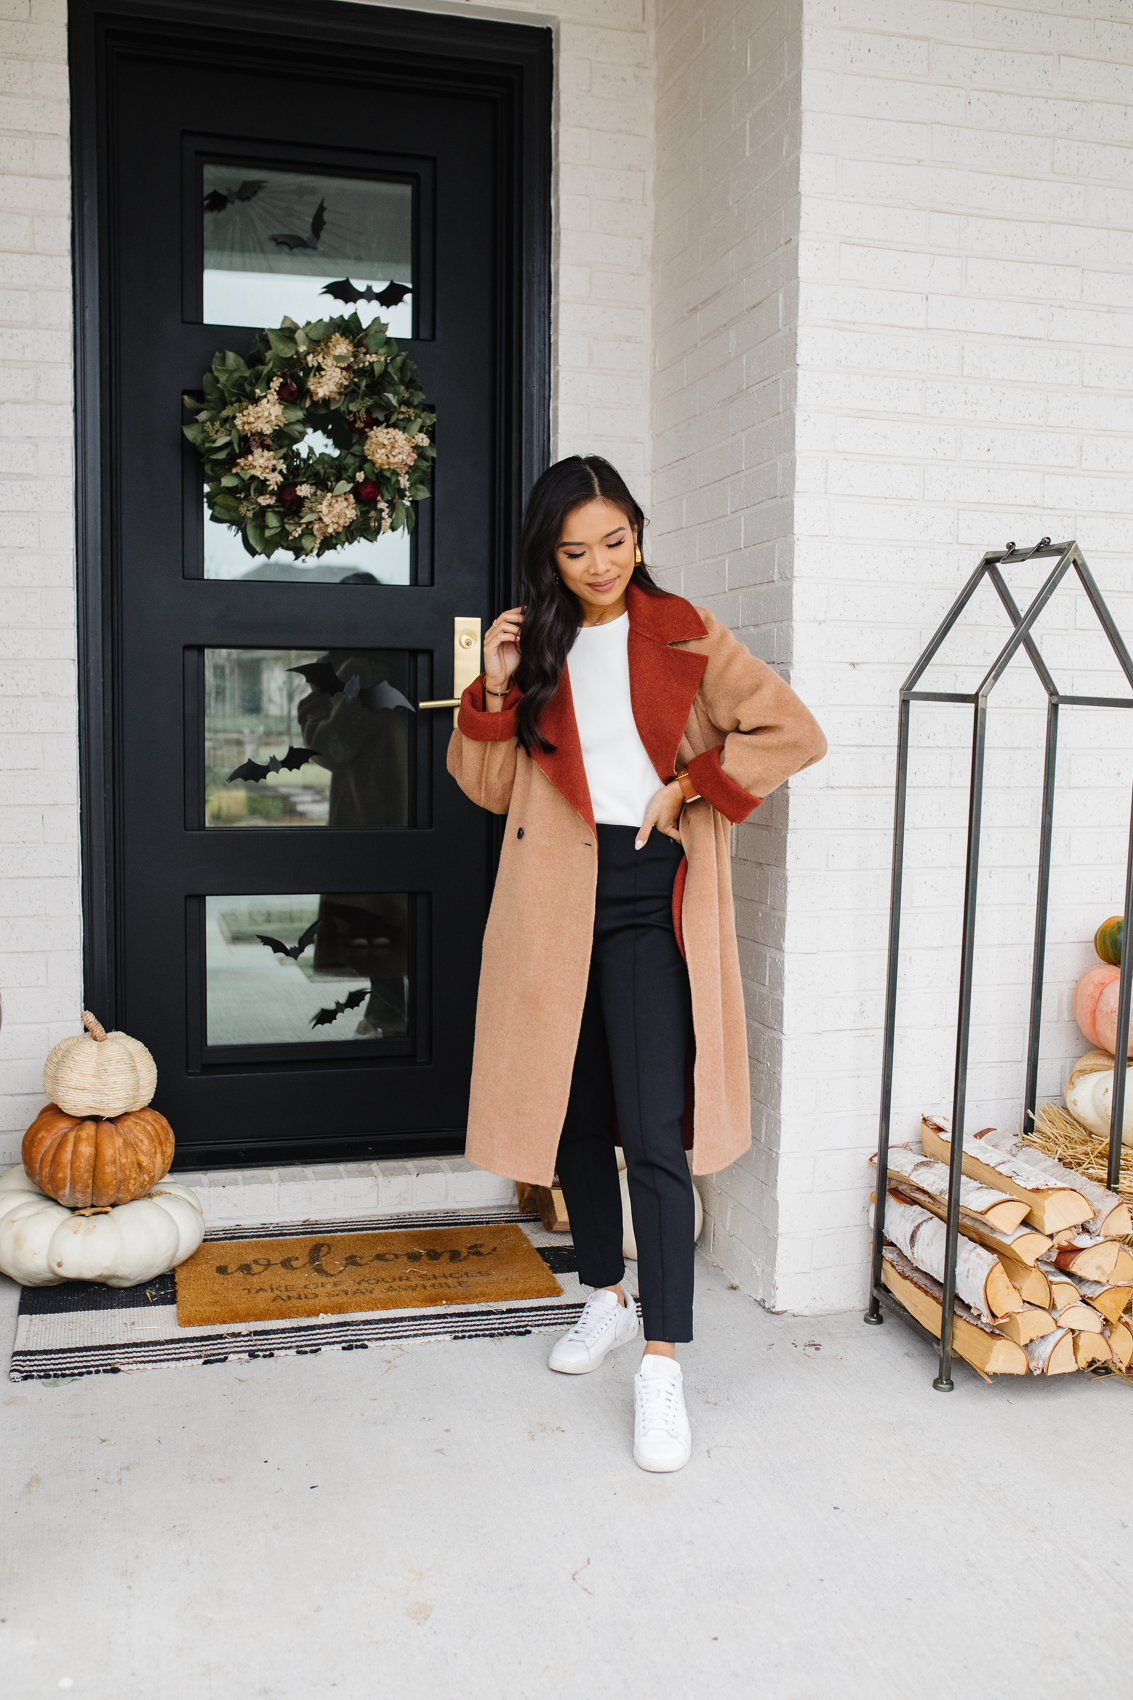 Hoang-Kim wearing a casual fall outfit with a reversible wool camel coat, white tee and black pants with white sneakers